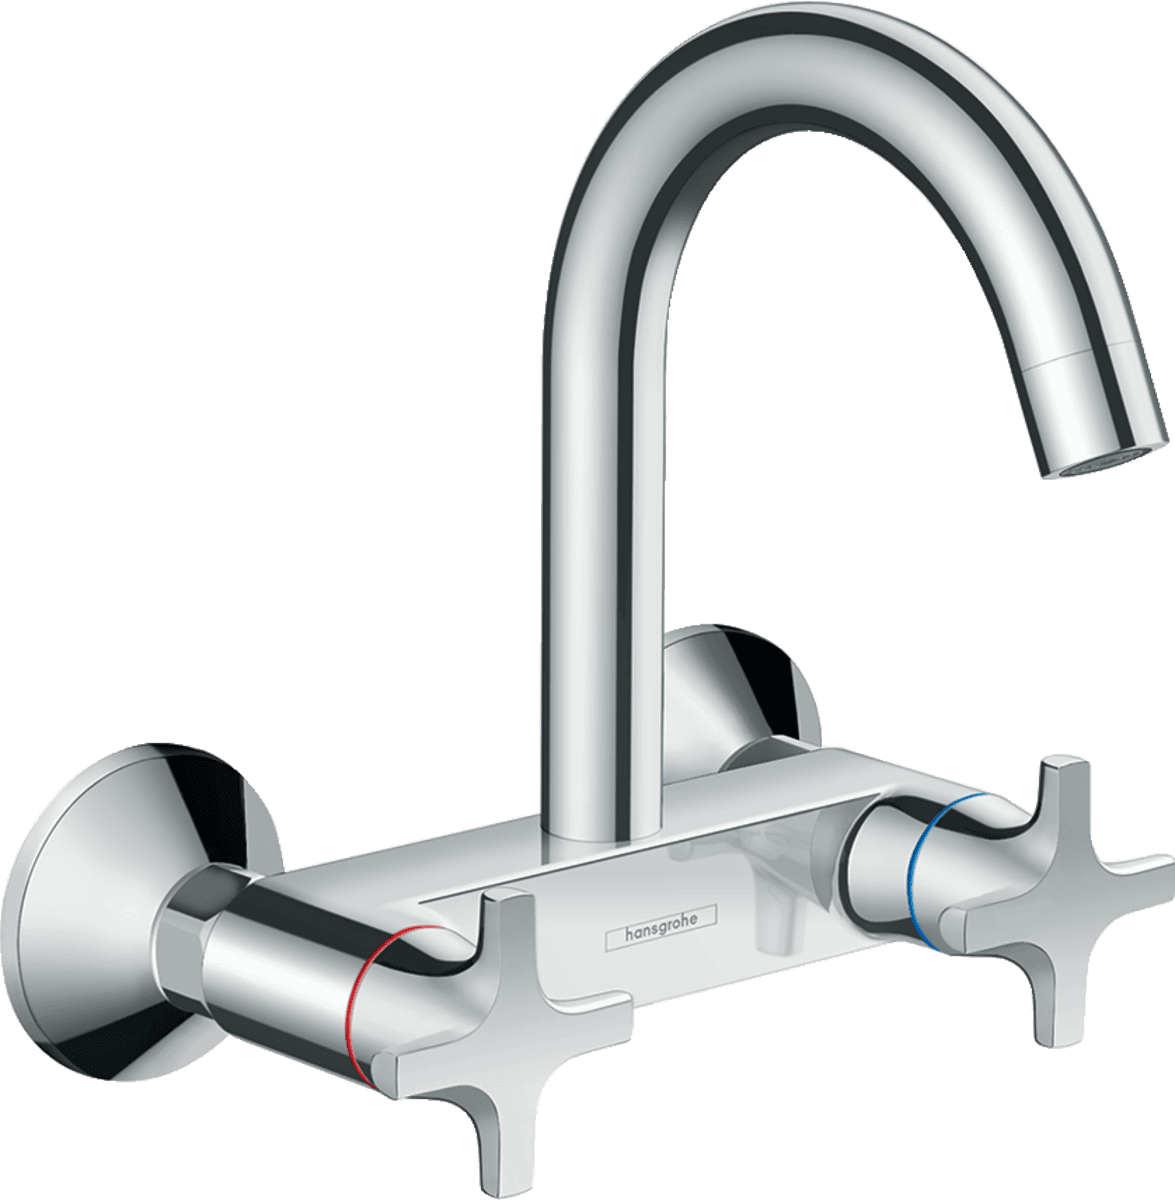 Picture of HANSGROHE Logis M32 2-handle kitchen mixer, wall-mounted, highspout, 1jet #71286000 - Chrome